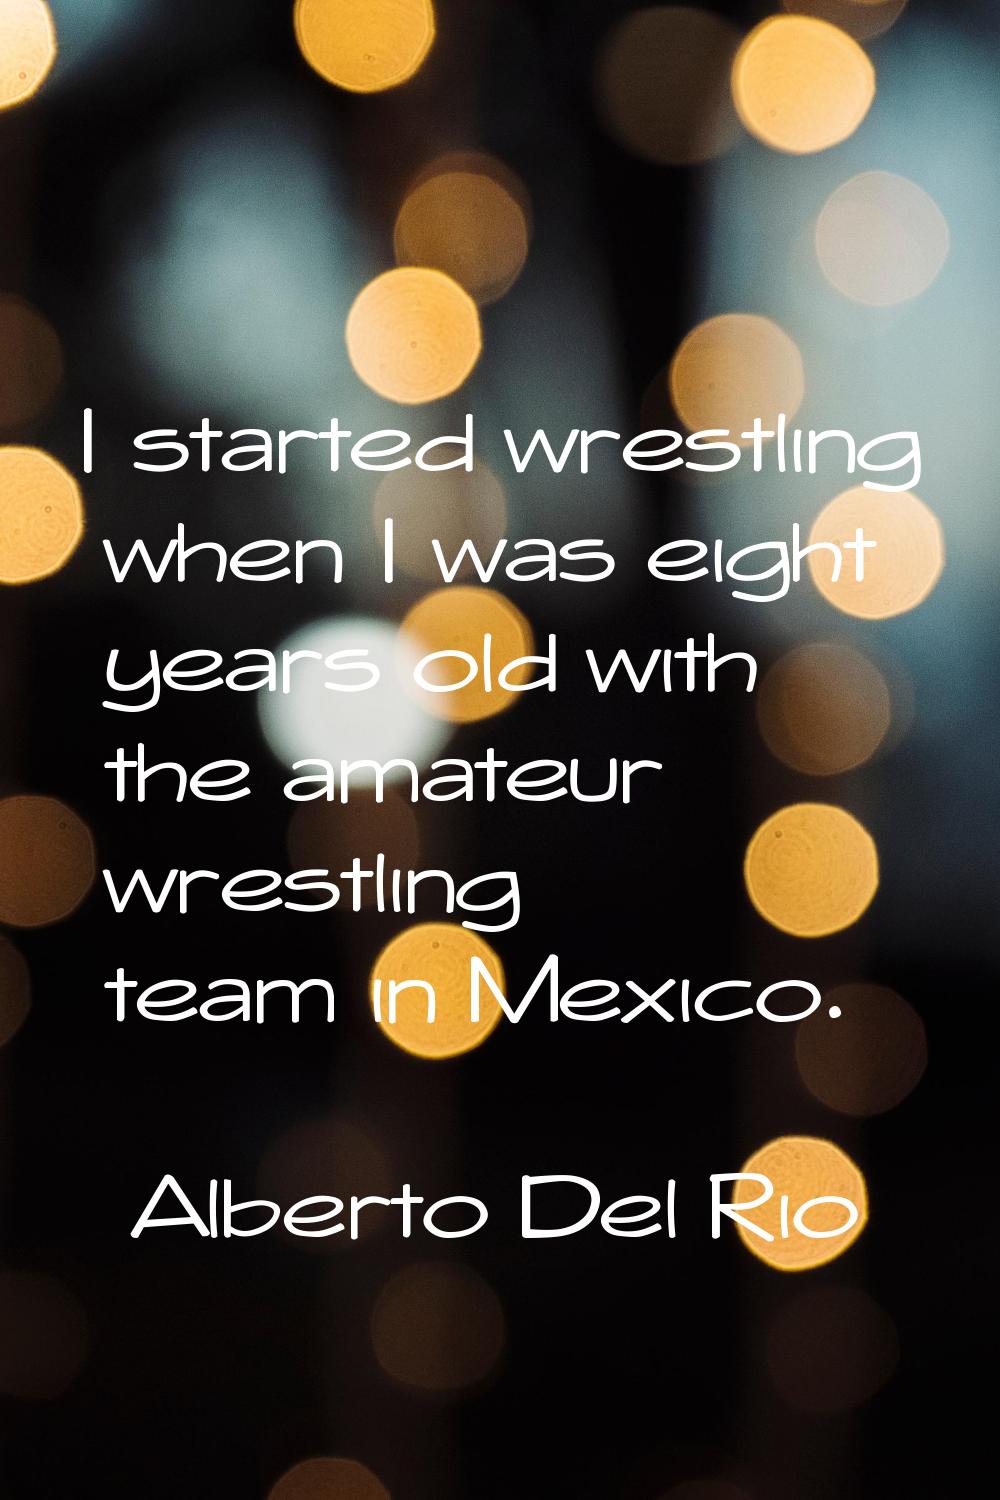 I started wrestling when I was eight years old with the amateur wrestling team in Mexico.